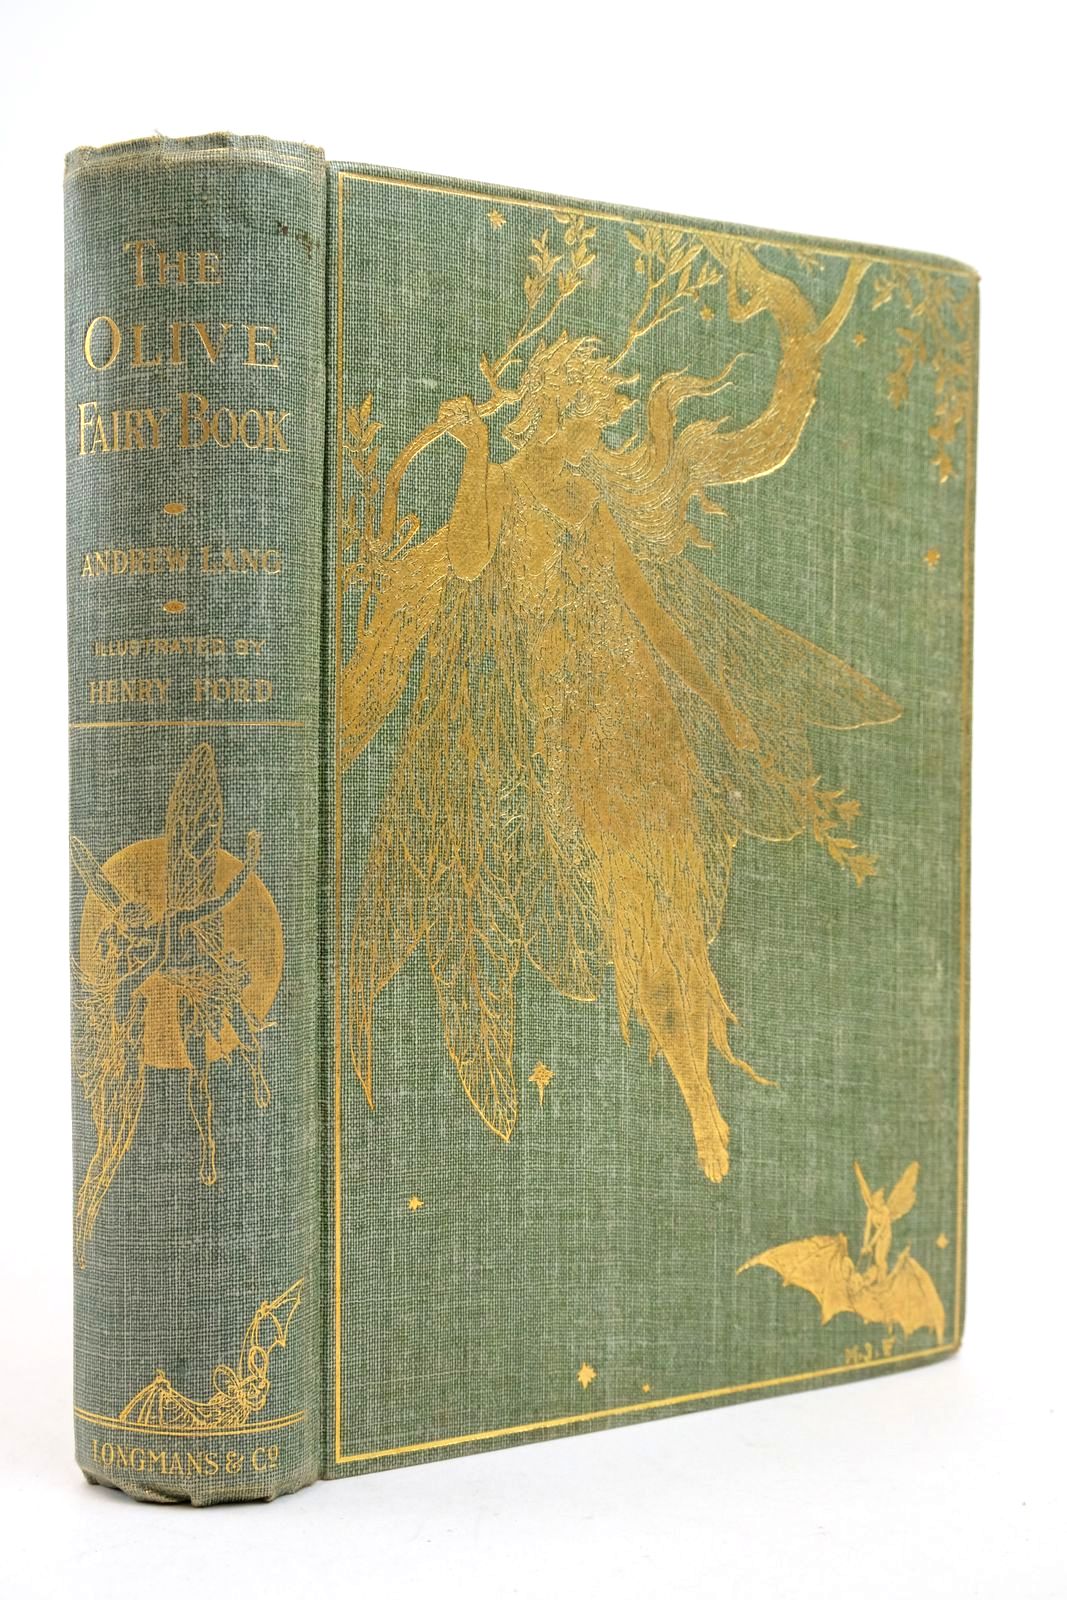 Photo of THE OLIVE FAIRY BOOK written by Lang, Andrew illustrated by Ford, H.J. published by Longmans, Green &amp; Co. (STOCK CODE: 2139752)  for sale by Stella & Rose's Books